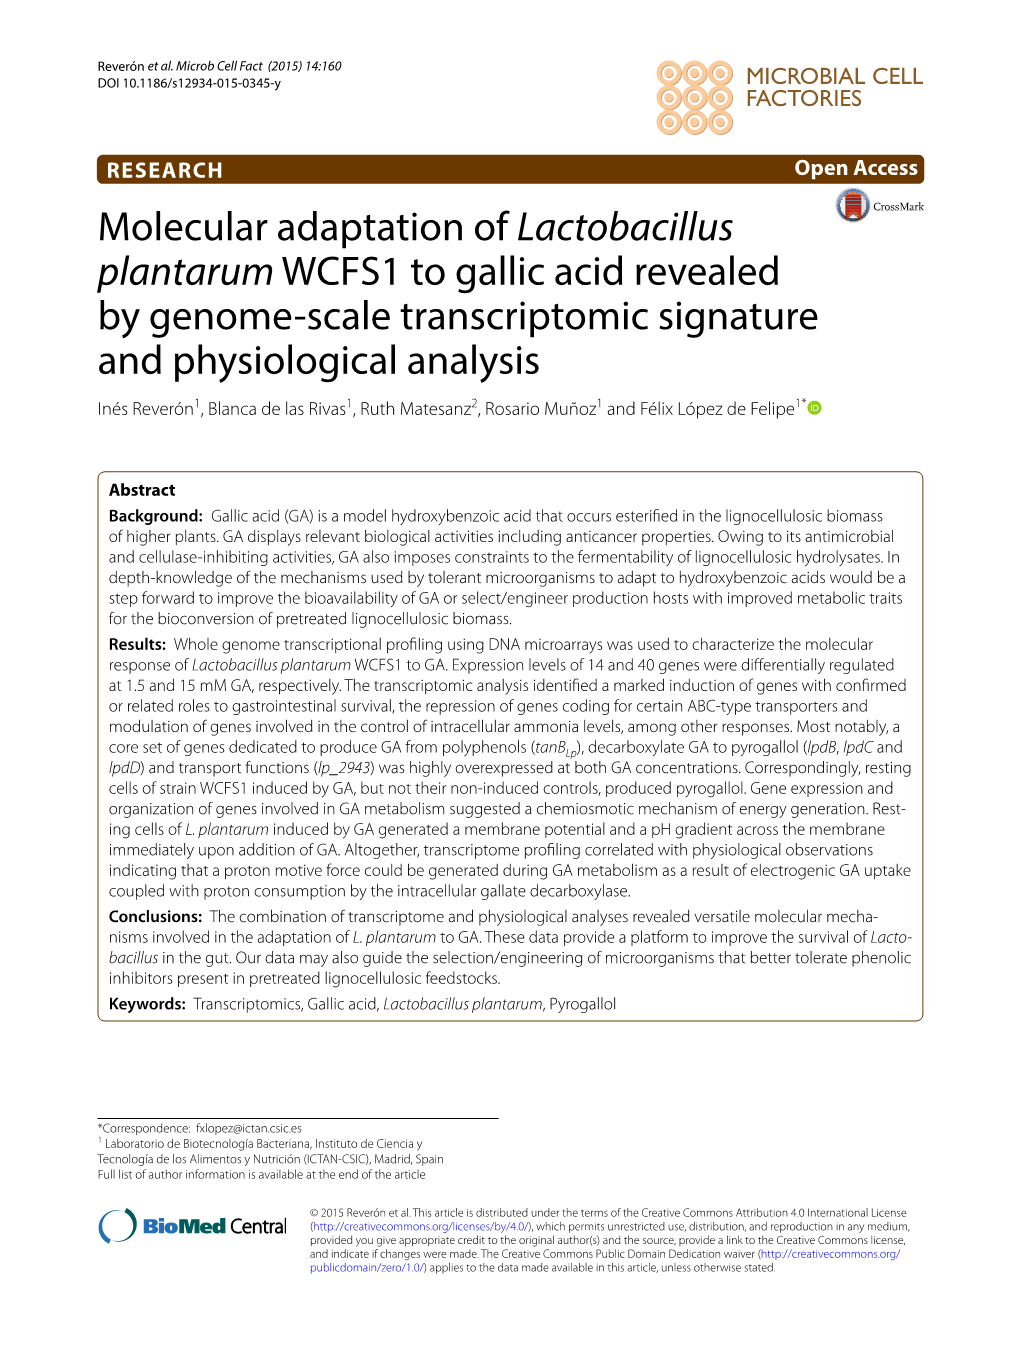 Molecular Adaptation of Lactobacillus Plantarum WCFS1 to Gallic Acid Revealed by Genome-Scale Transcriptomic Signature and Physi